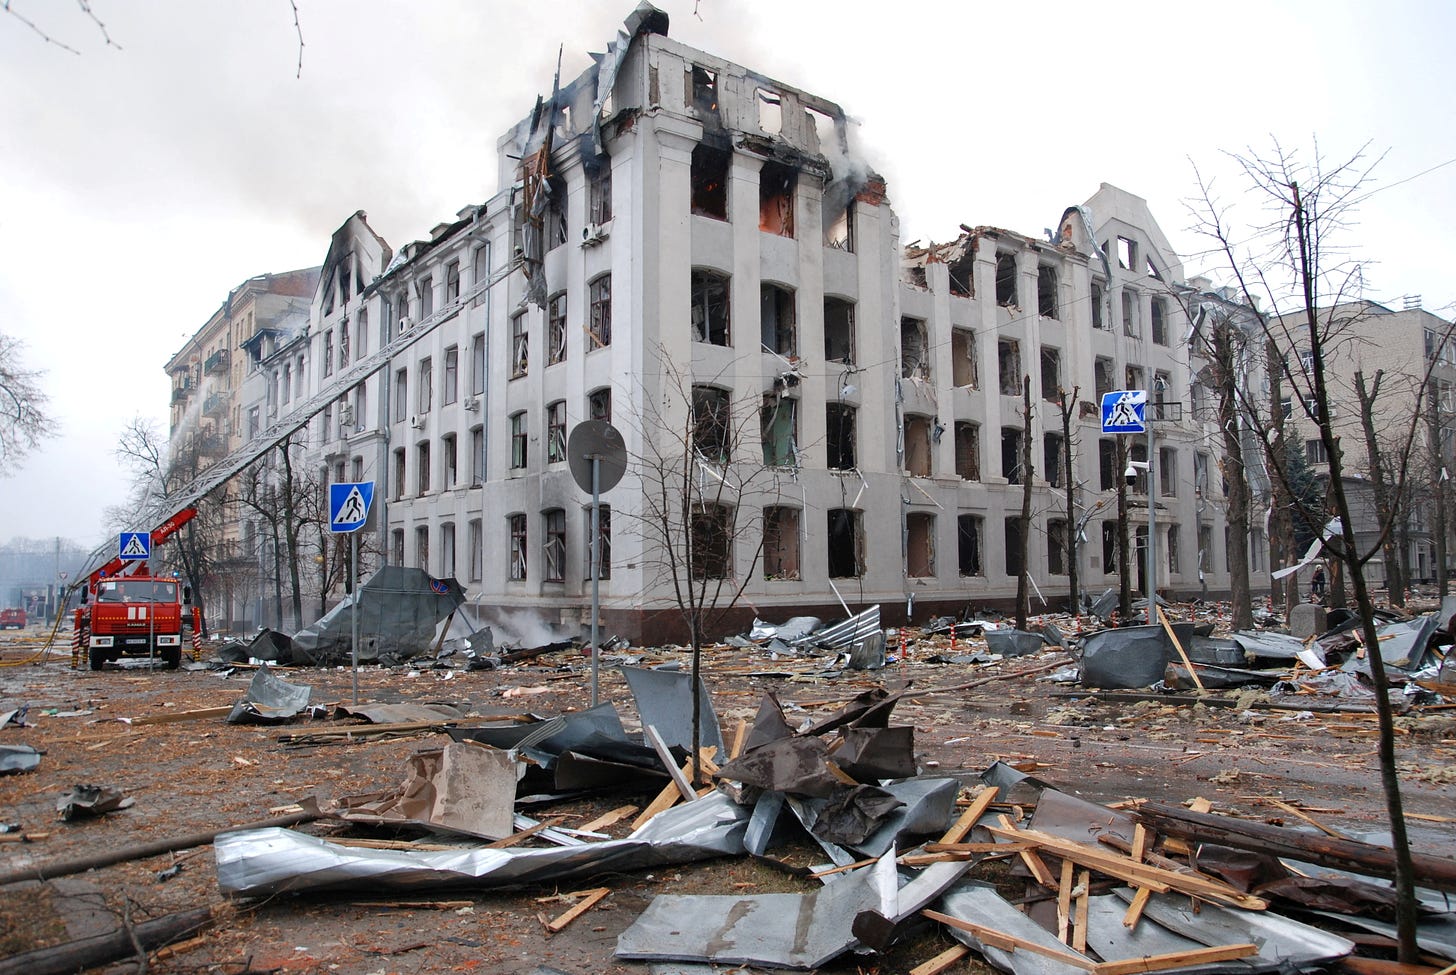 Anger and disbelief amidst the rubble in Ukraine's Kharkiv | Reuters